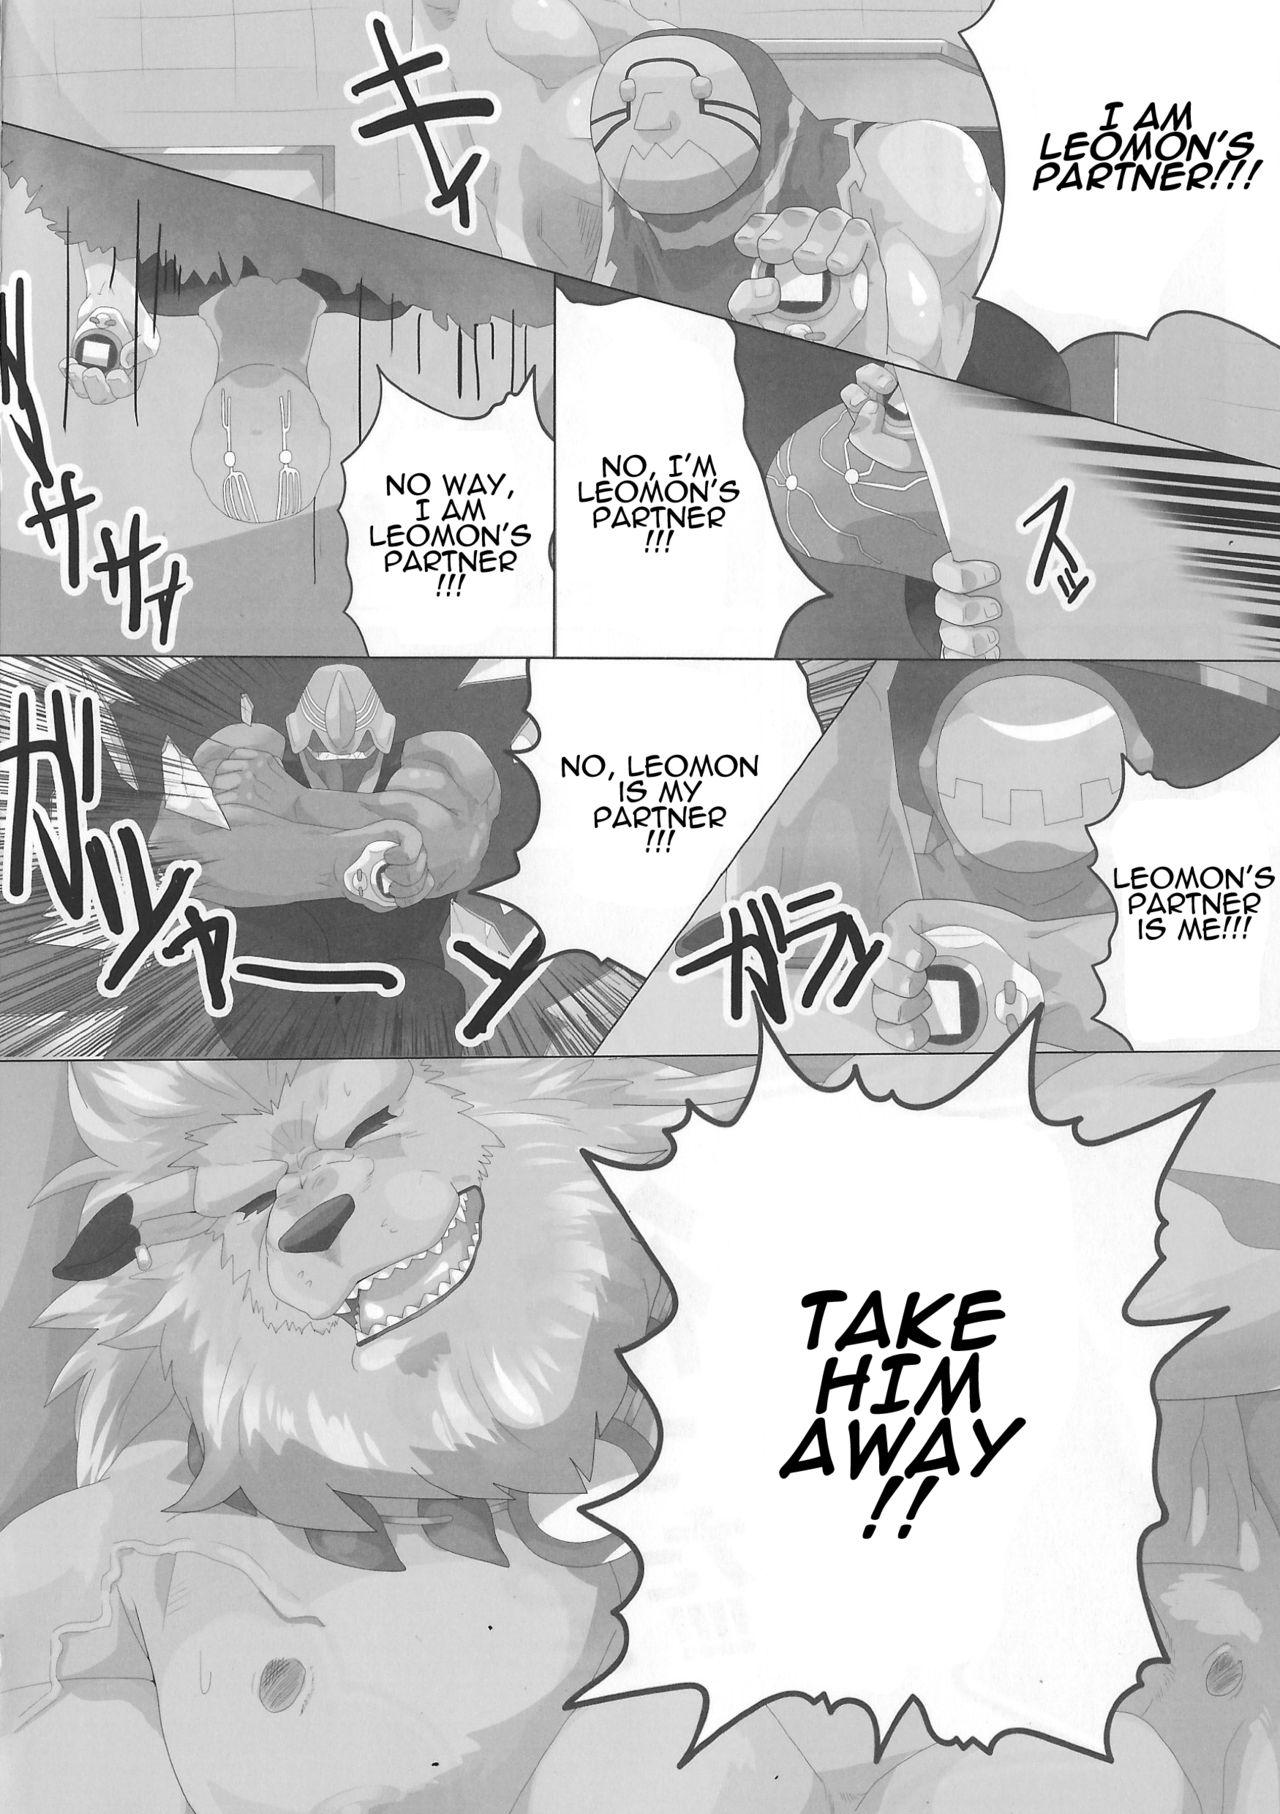 [Debirobu] For the Lion-Man Type Electric Life Form to Overturn Fate - Leomon Doujin [ENG] 5